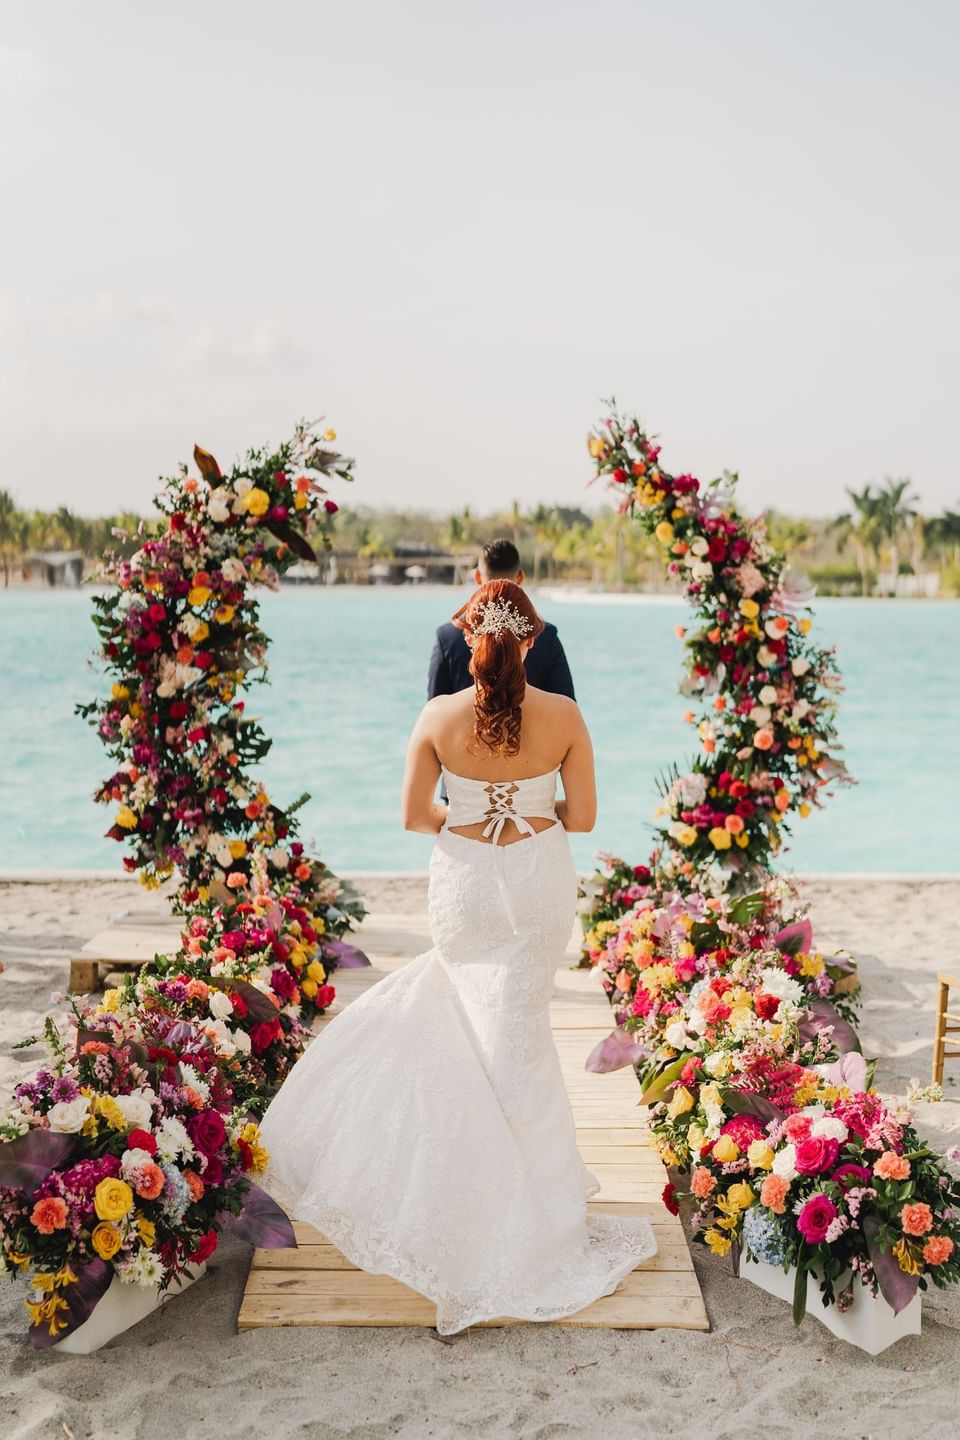 Couple by the floral wedding arch at Playa Blanca Beach Resort